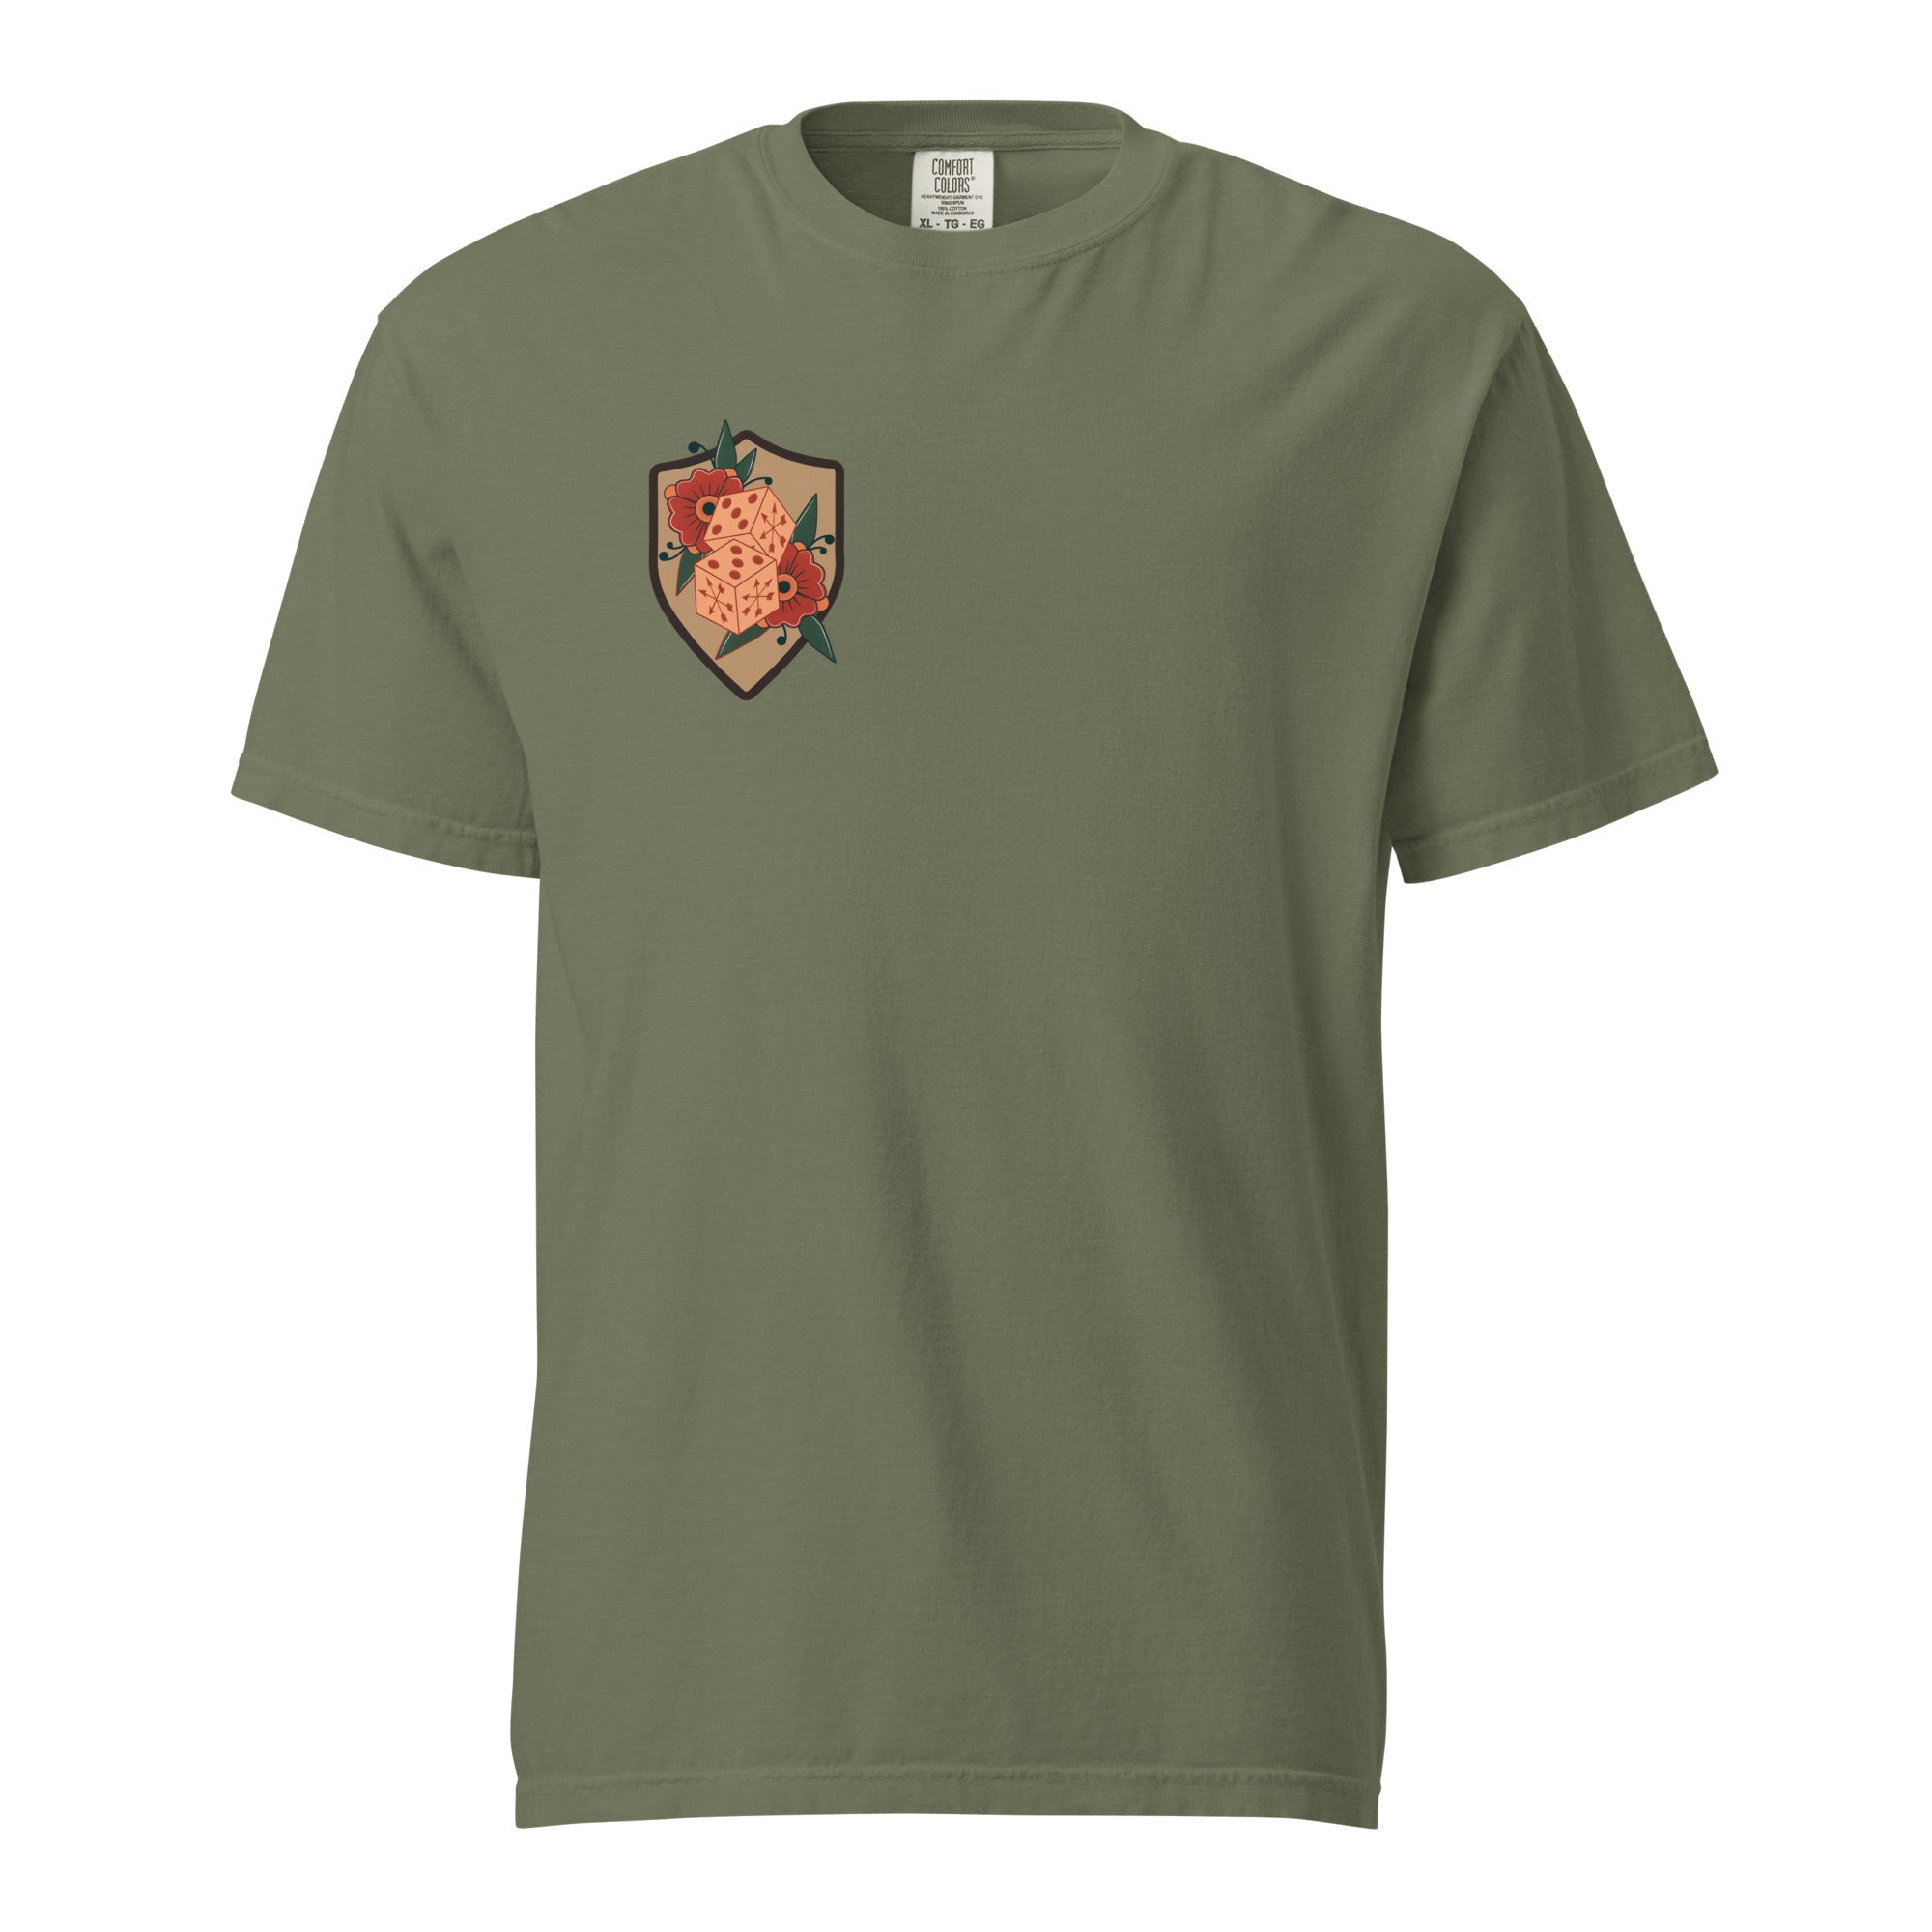 10 Year Anniversary Summer Collection Comfort Colors Tee - Tan - SOARescue